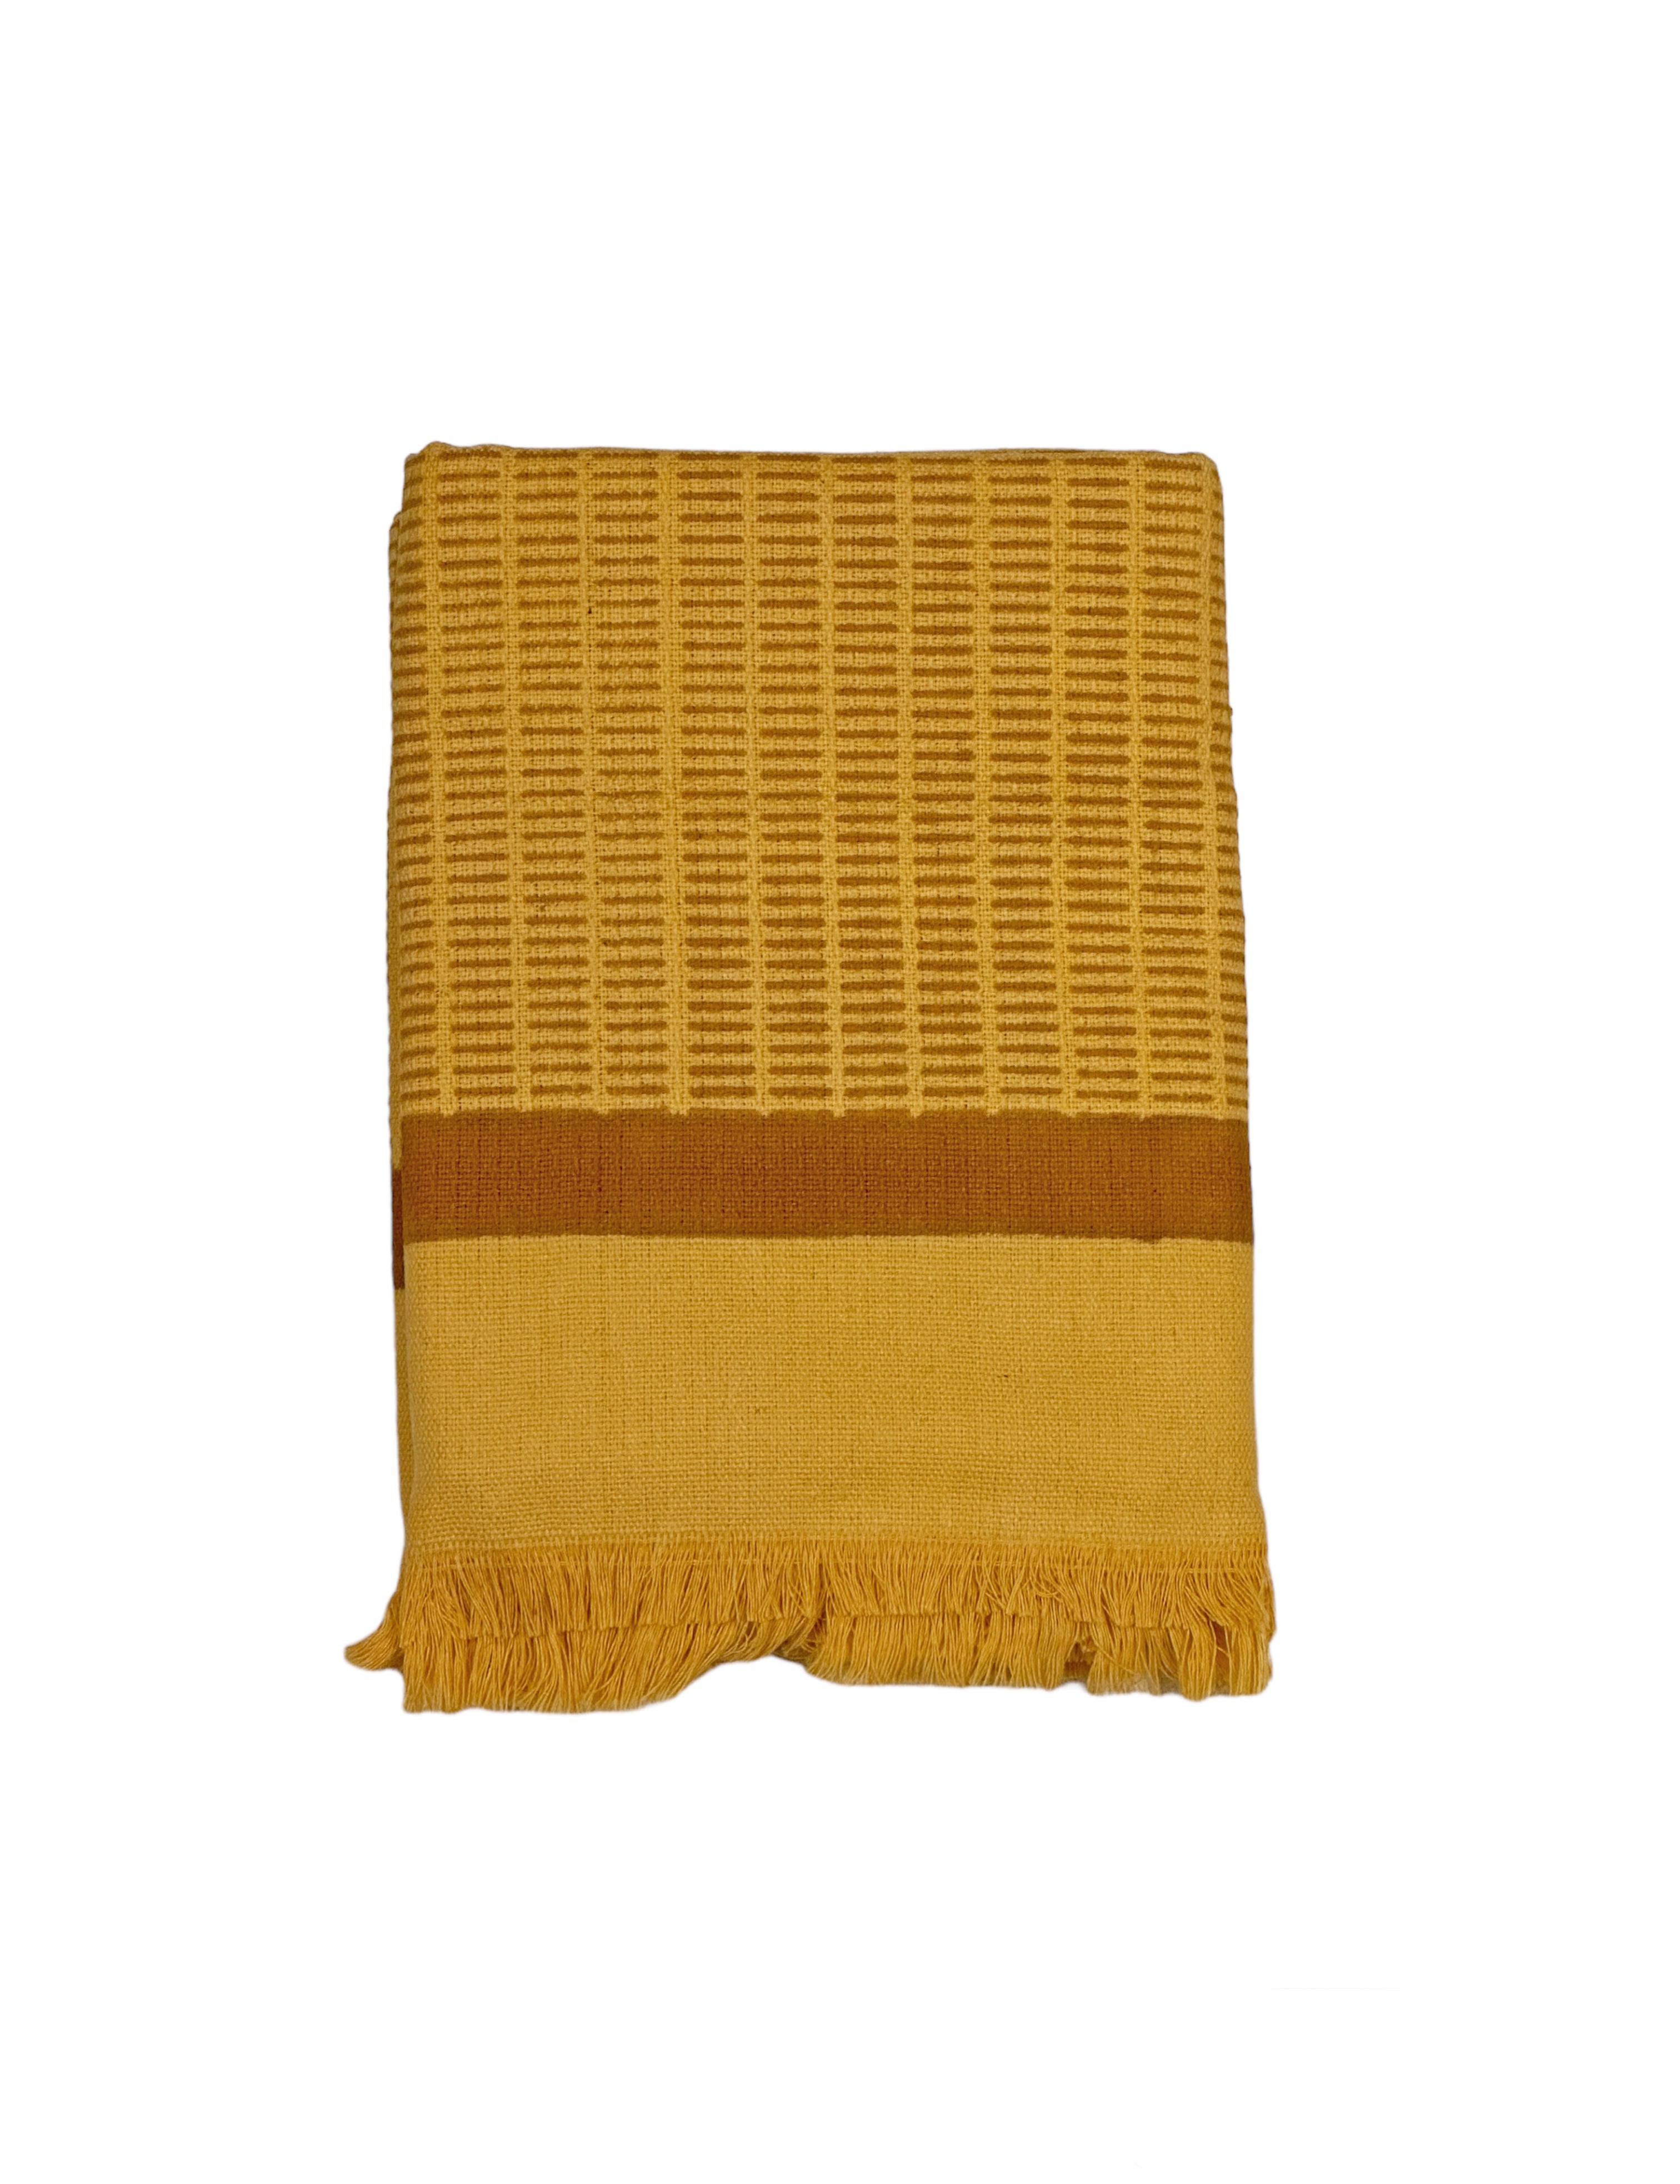 Block printed, yellow/brown, dash/line print bath towel, folded and laid flat against a white background